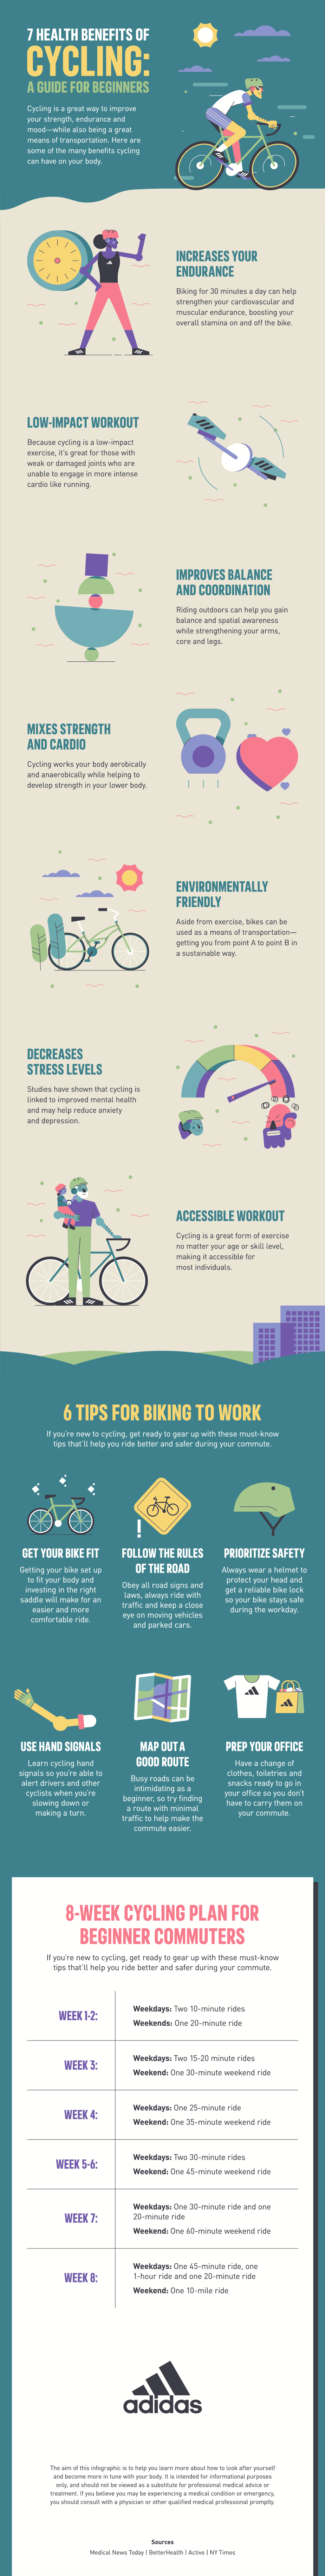 Seven benefits of cycling to work